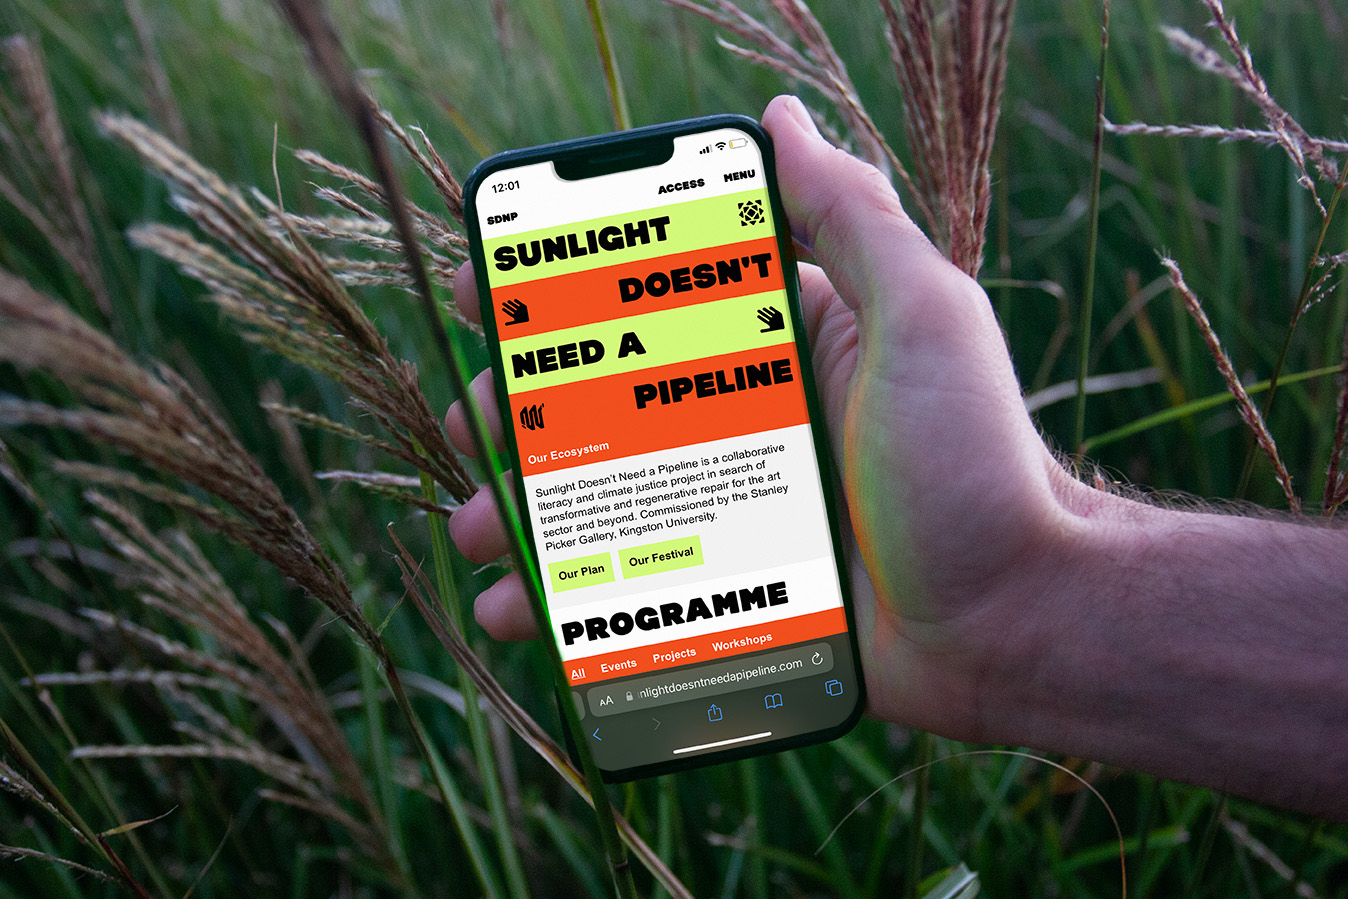 alt: A hand holding a phone in front of some long grass, displayed on the phone is the Sunlight Doesn't Need a Pipeline mobile website.